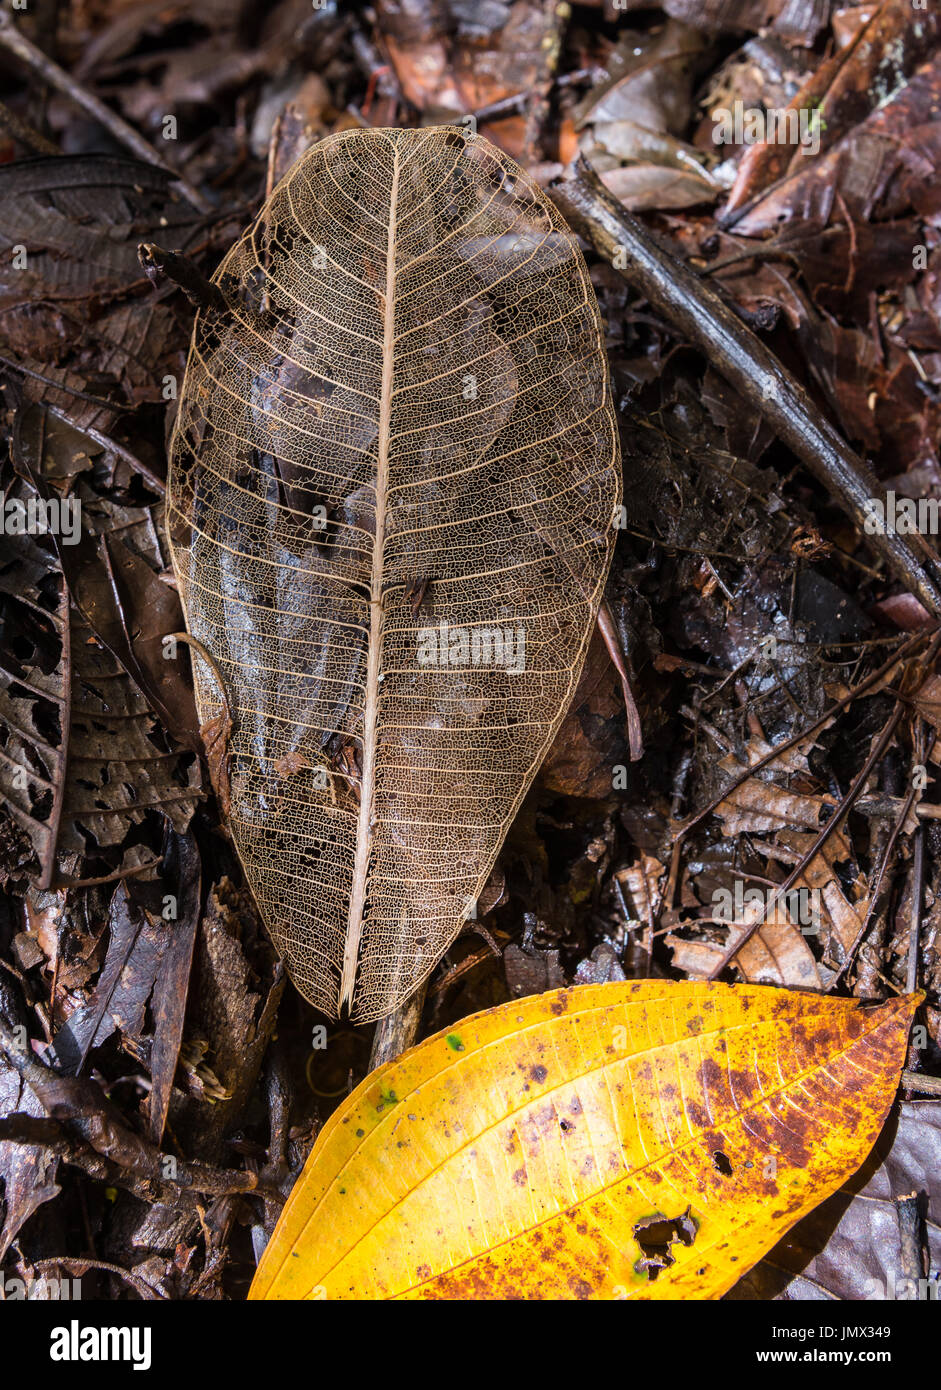 Decayed and about to decay leaves in forest. Colombia, South America. Stock Photo